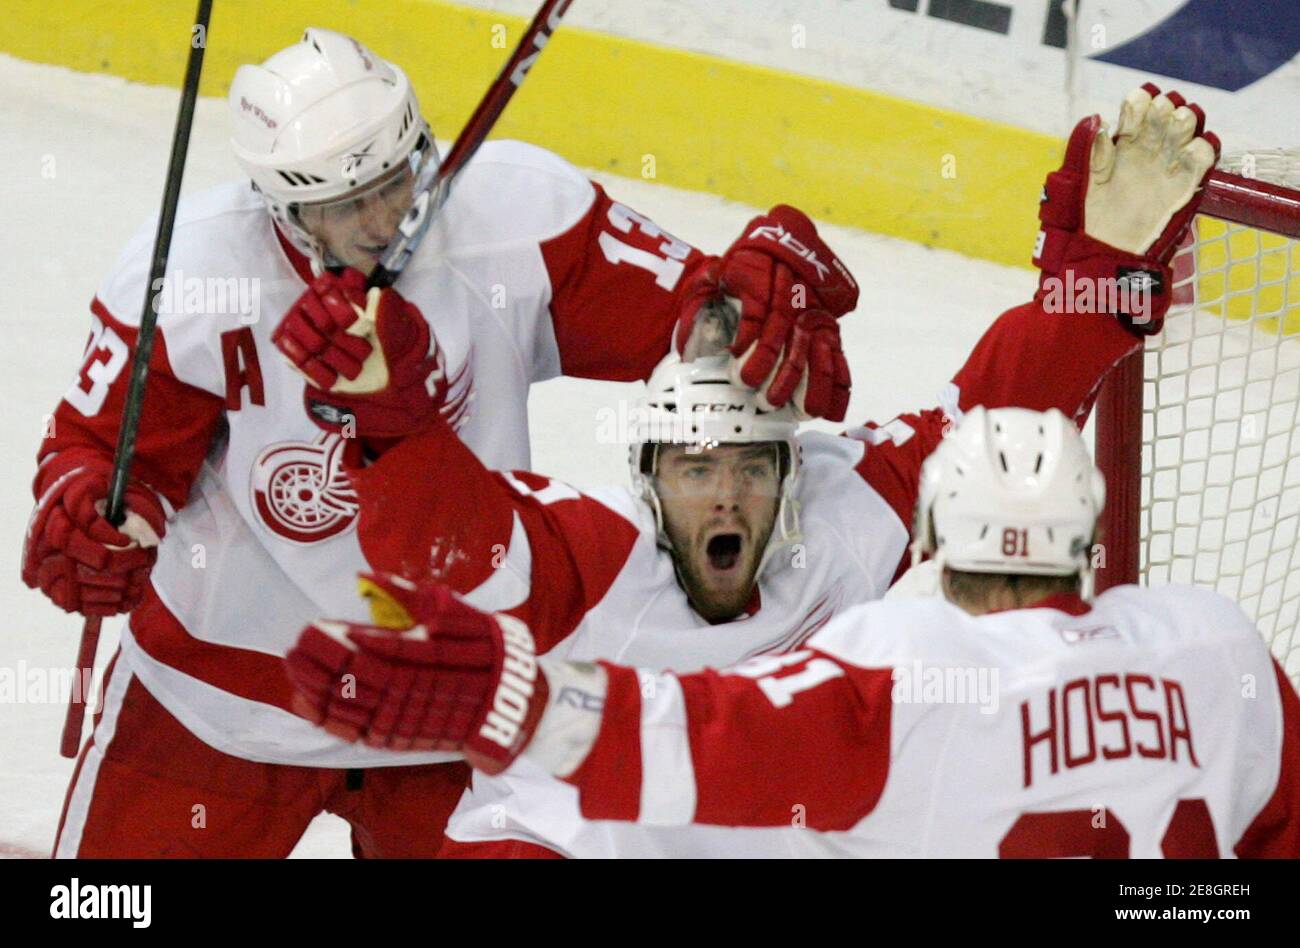 Detroit Red Wings Ville Leino (C) celebrates his first NHL goal against the Washington Capitals with teammates Marian Hossa (R) and Pavel Datsyuk (L) in the first period of their NHL hockey game in Washington, January 31, 2009.   REUTERS/Gary Cameron   (UNITED STATES) Stock Photo